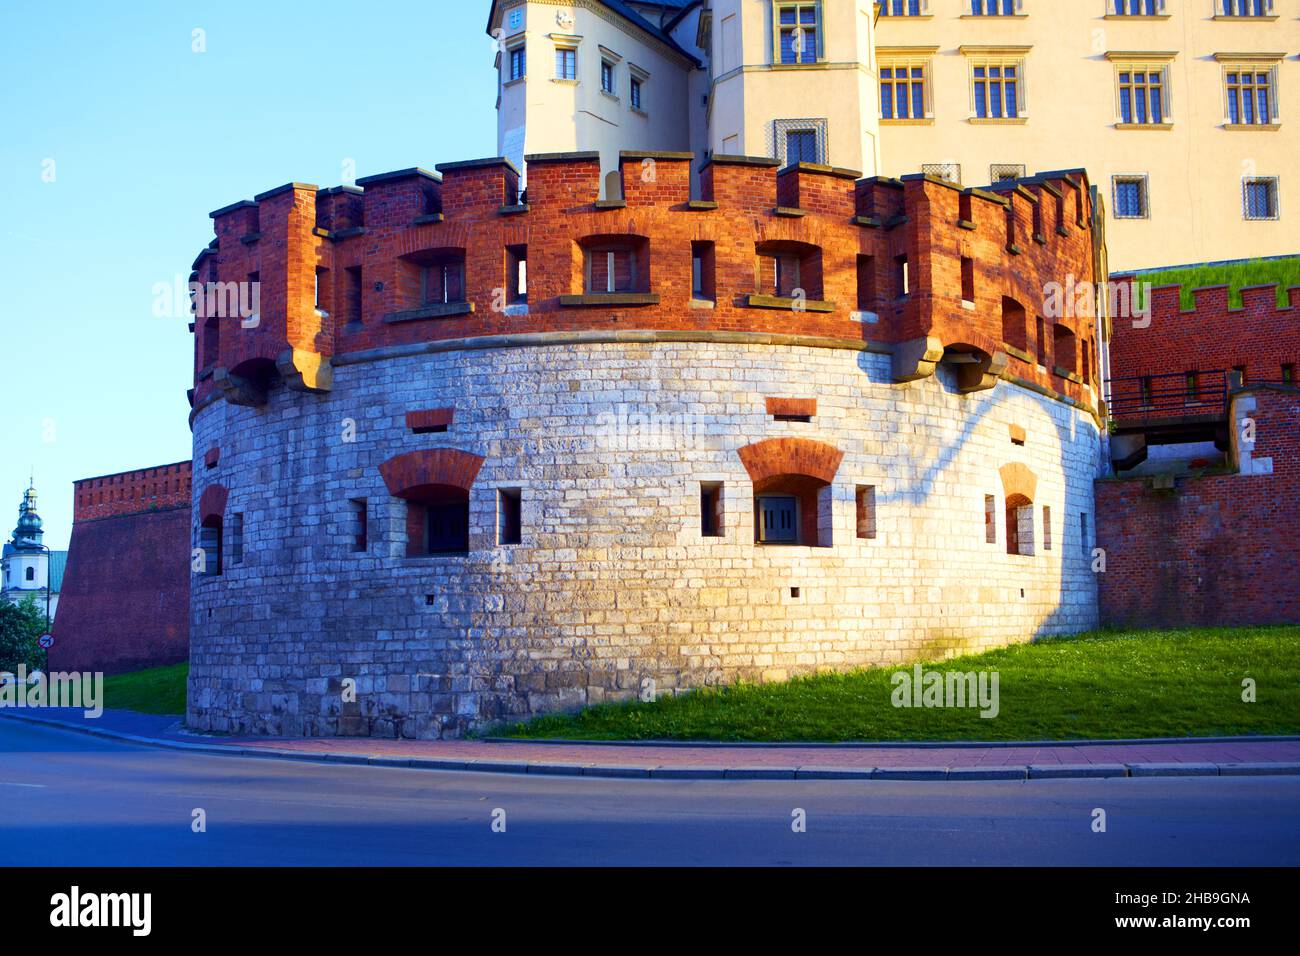 Poland, Cracow, Wawel castle, walls. Stock Photo